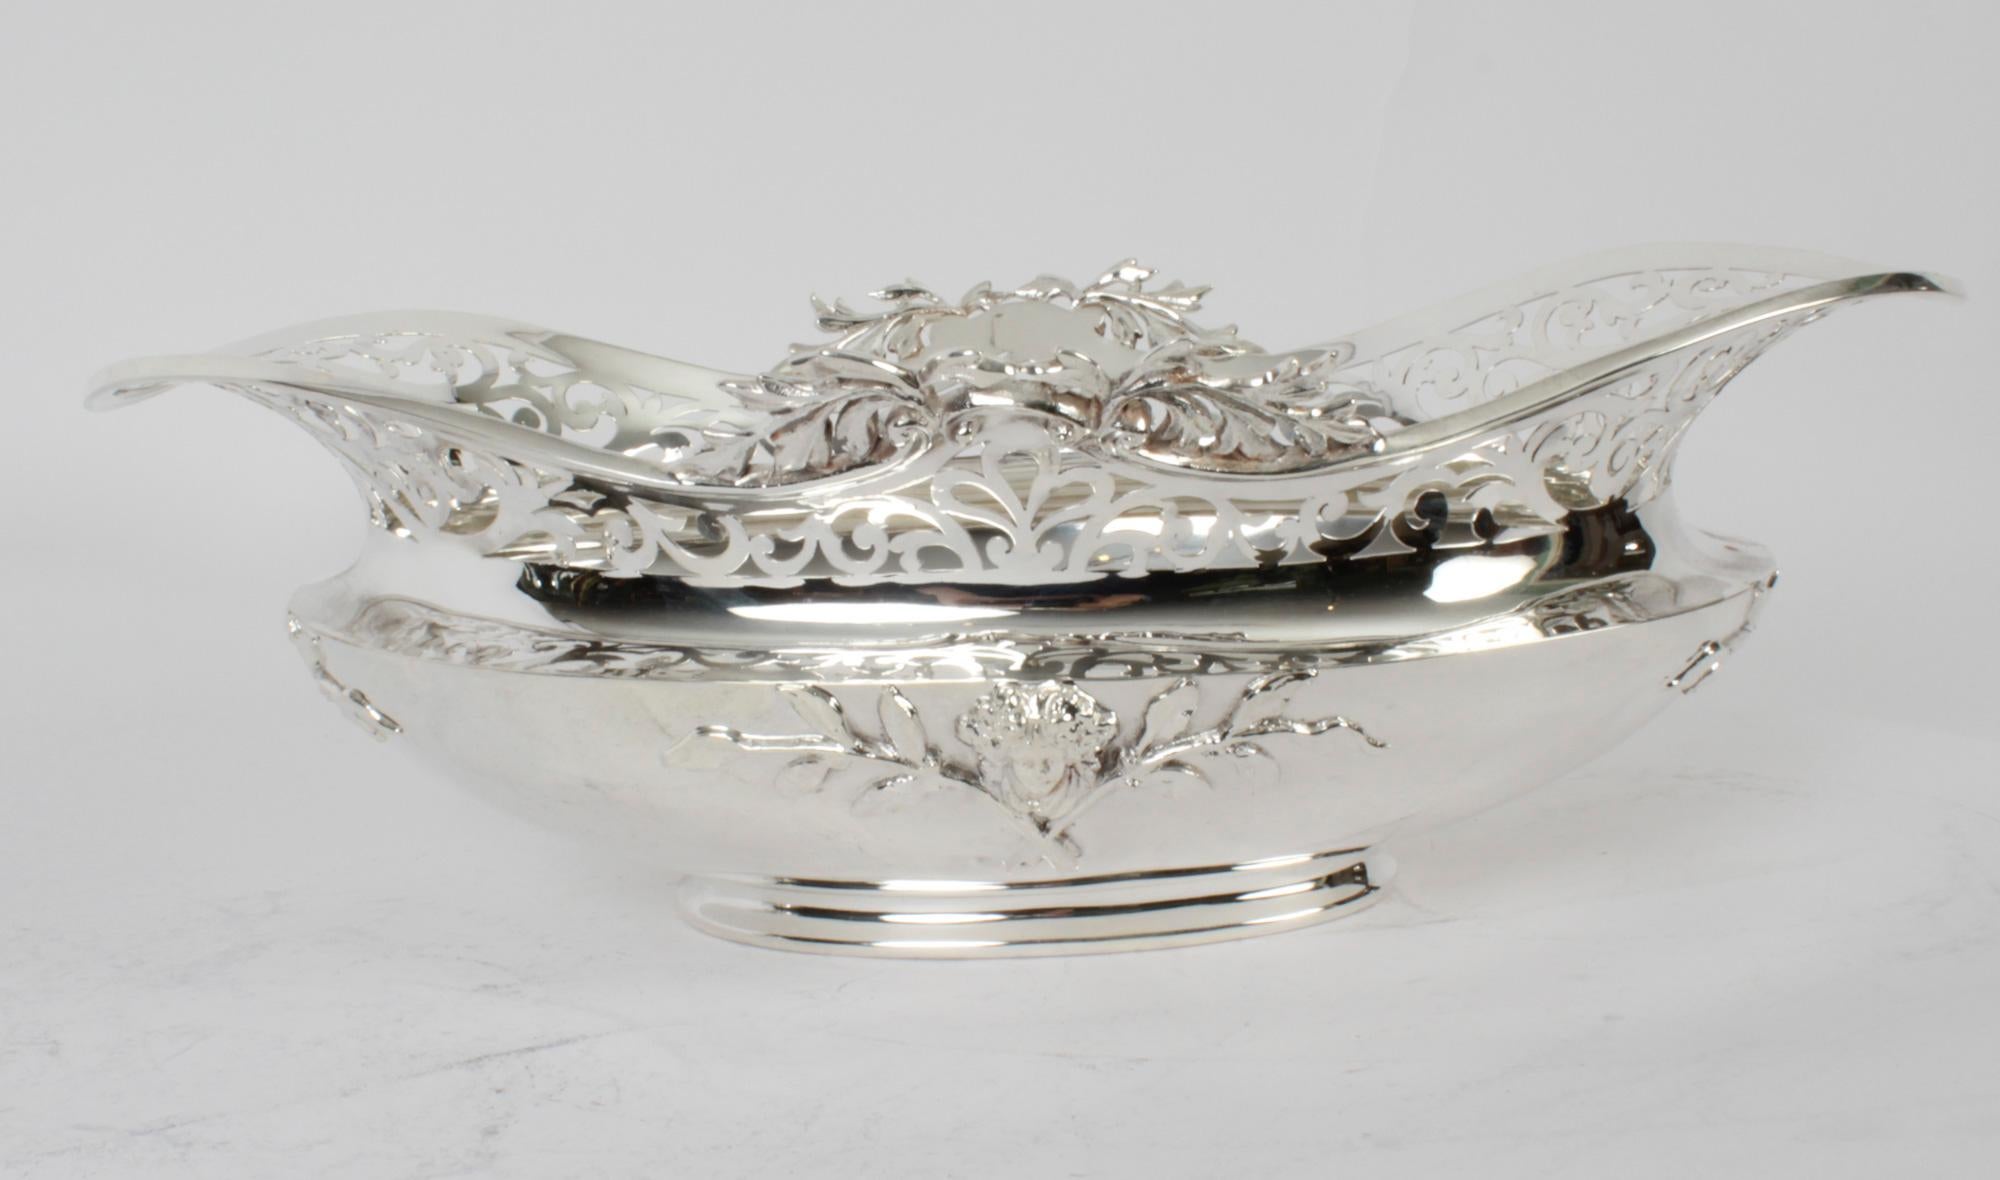 Antique Victorian Silverplate Centrepiece Mappin & Webb 1880 19th Century For Sale 11